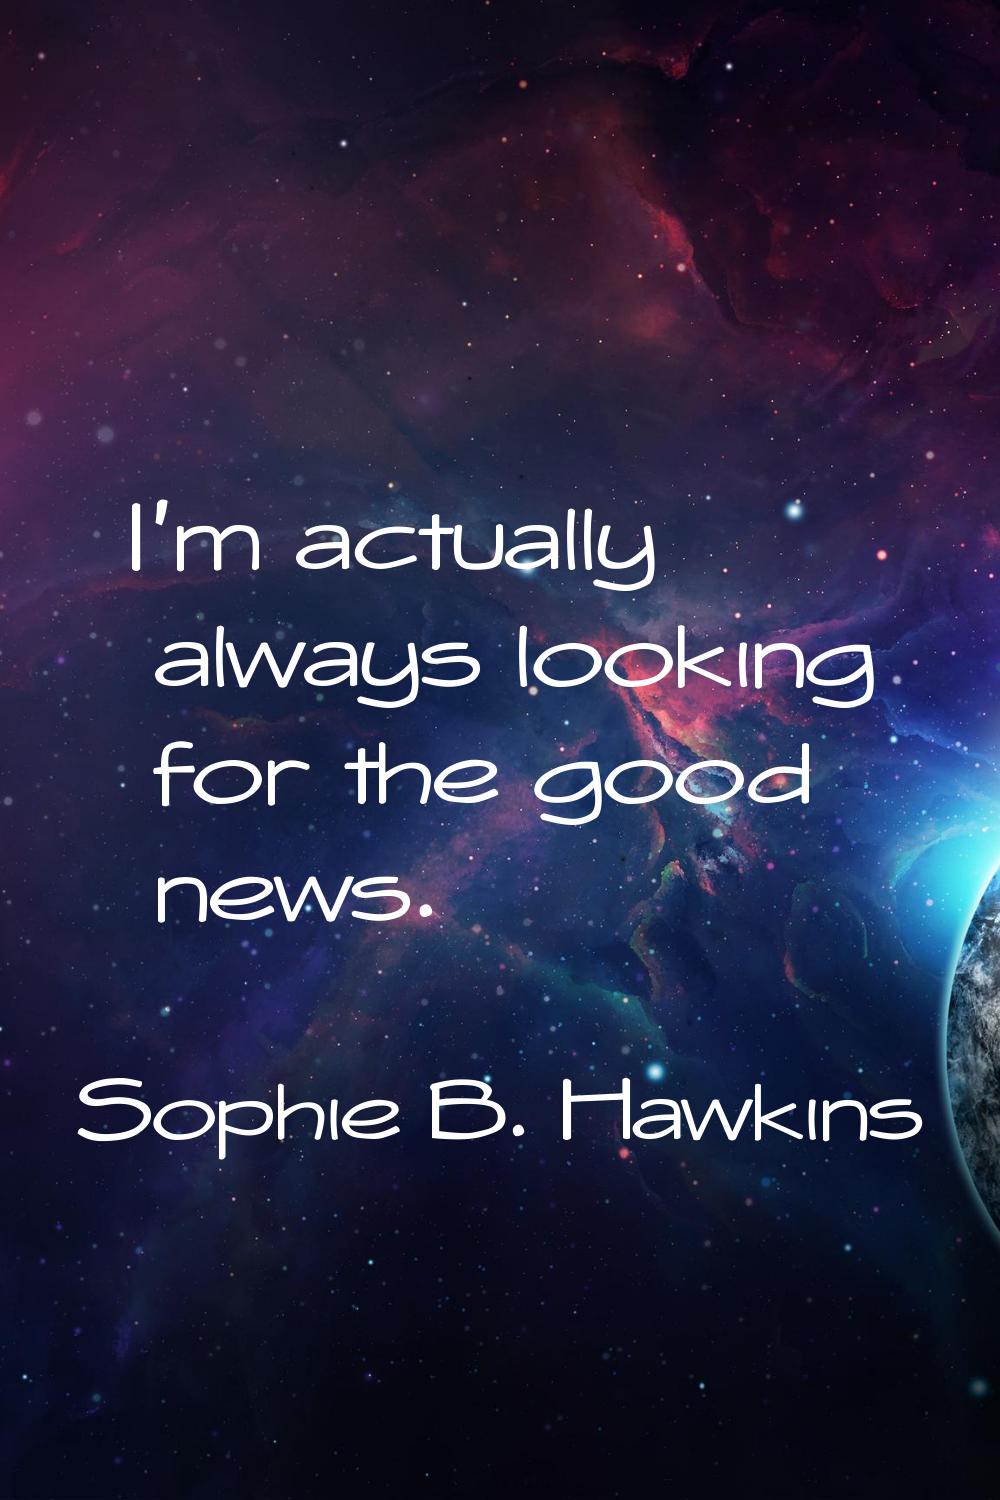 I'm actually always looking for the good news.